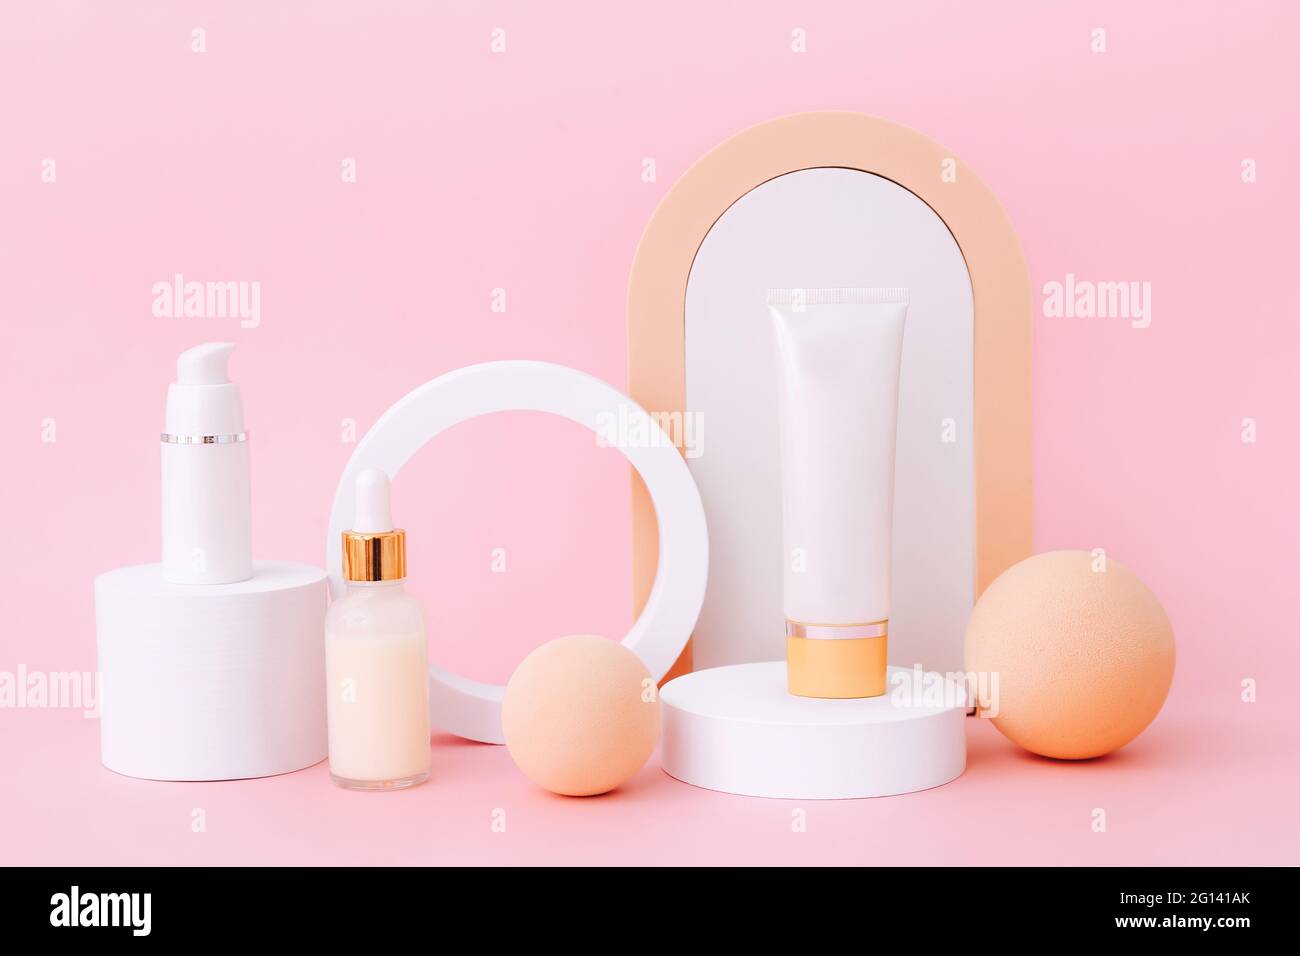 Cosmetic bottles on the geometric podiums. Presentation template for natural beauty products on pink background Stock Photo